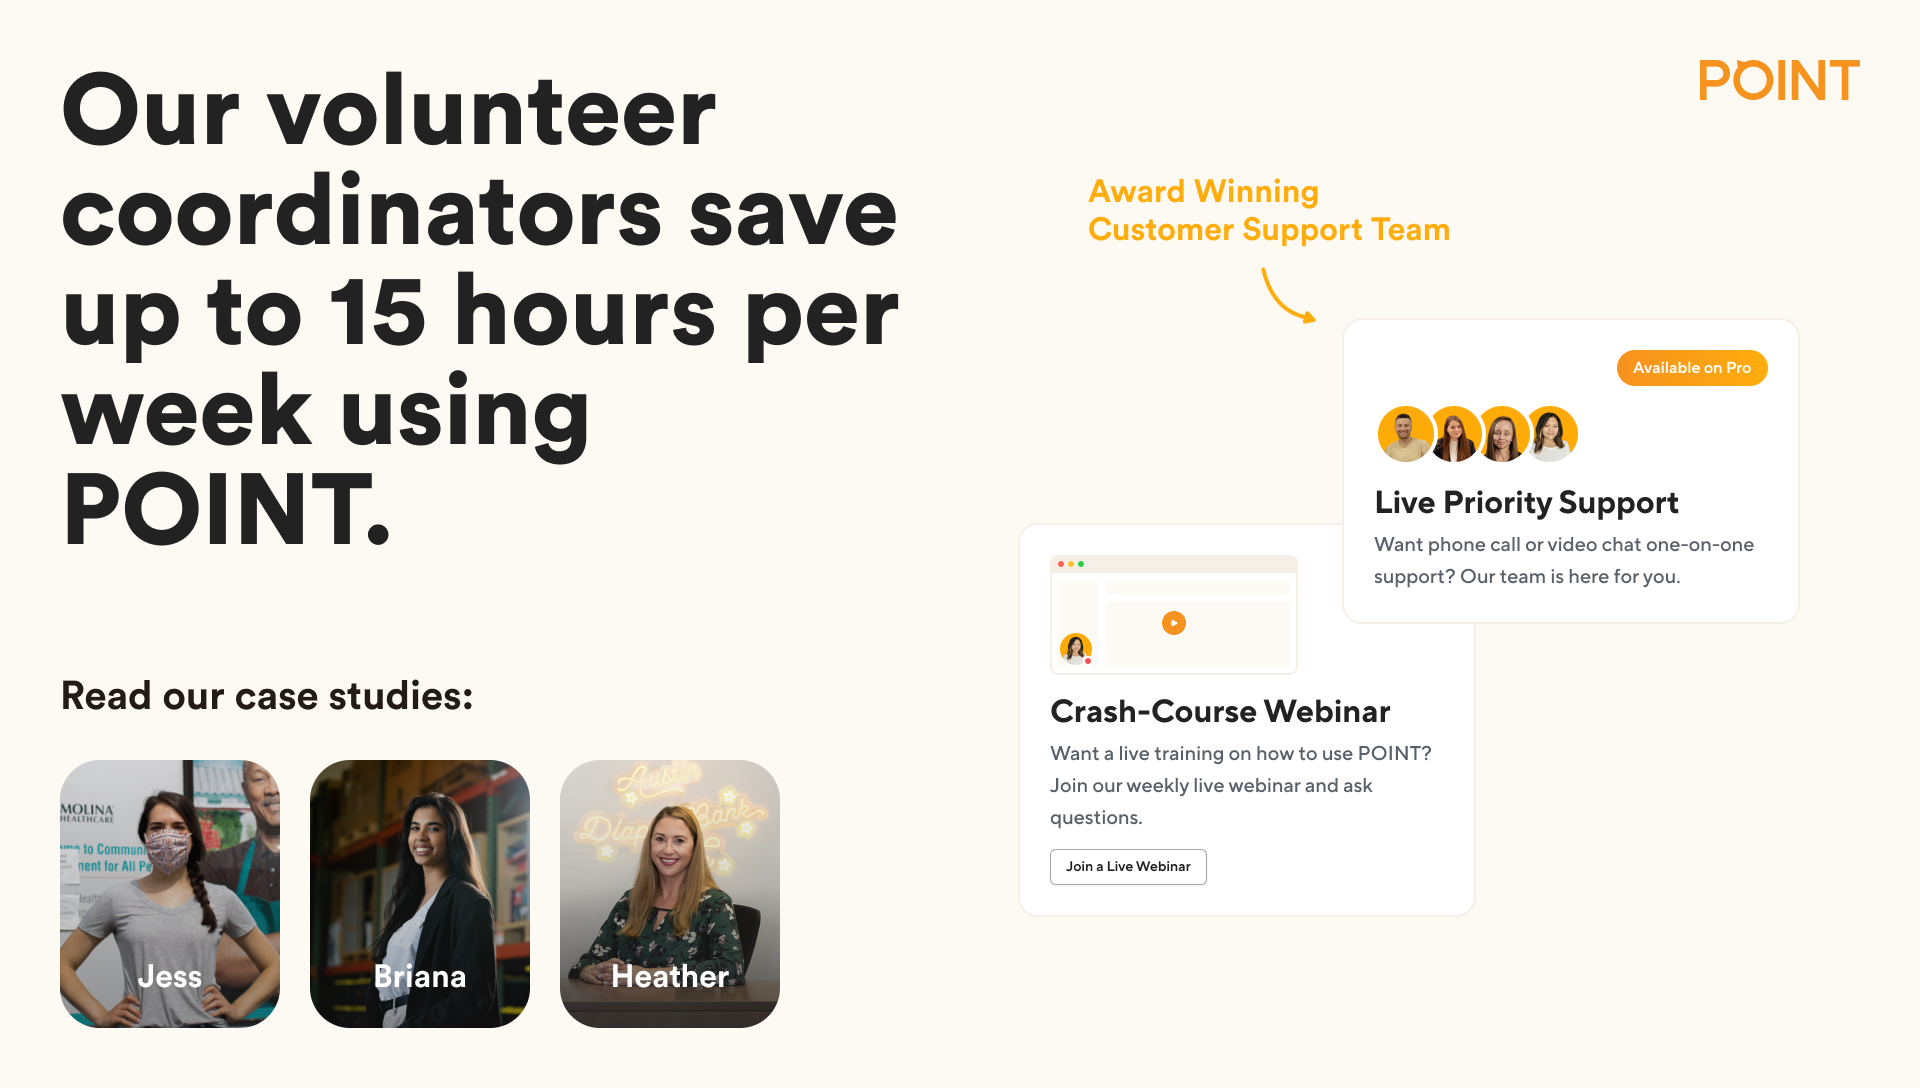 Our volunteer coordinators save up to 15 hours per week using POINT. But, you won't do it alone. Our award winning customer support team is here to help.